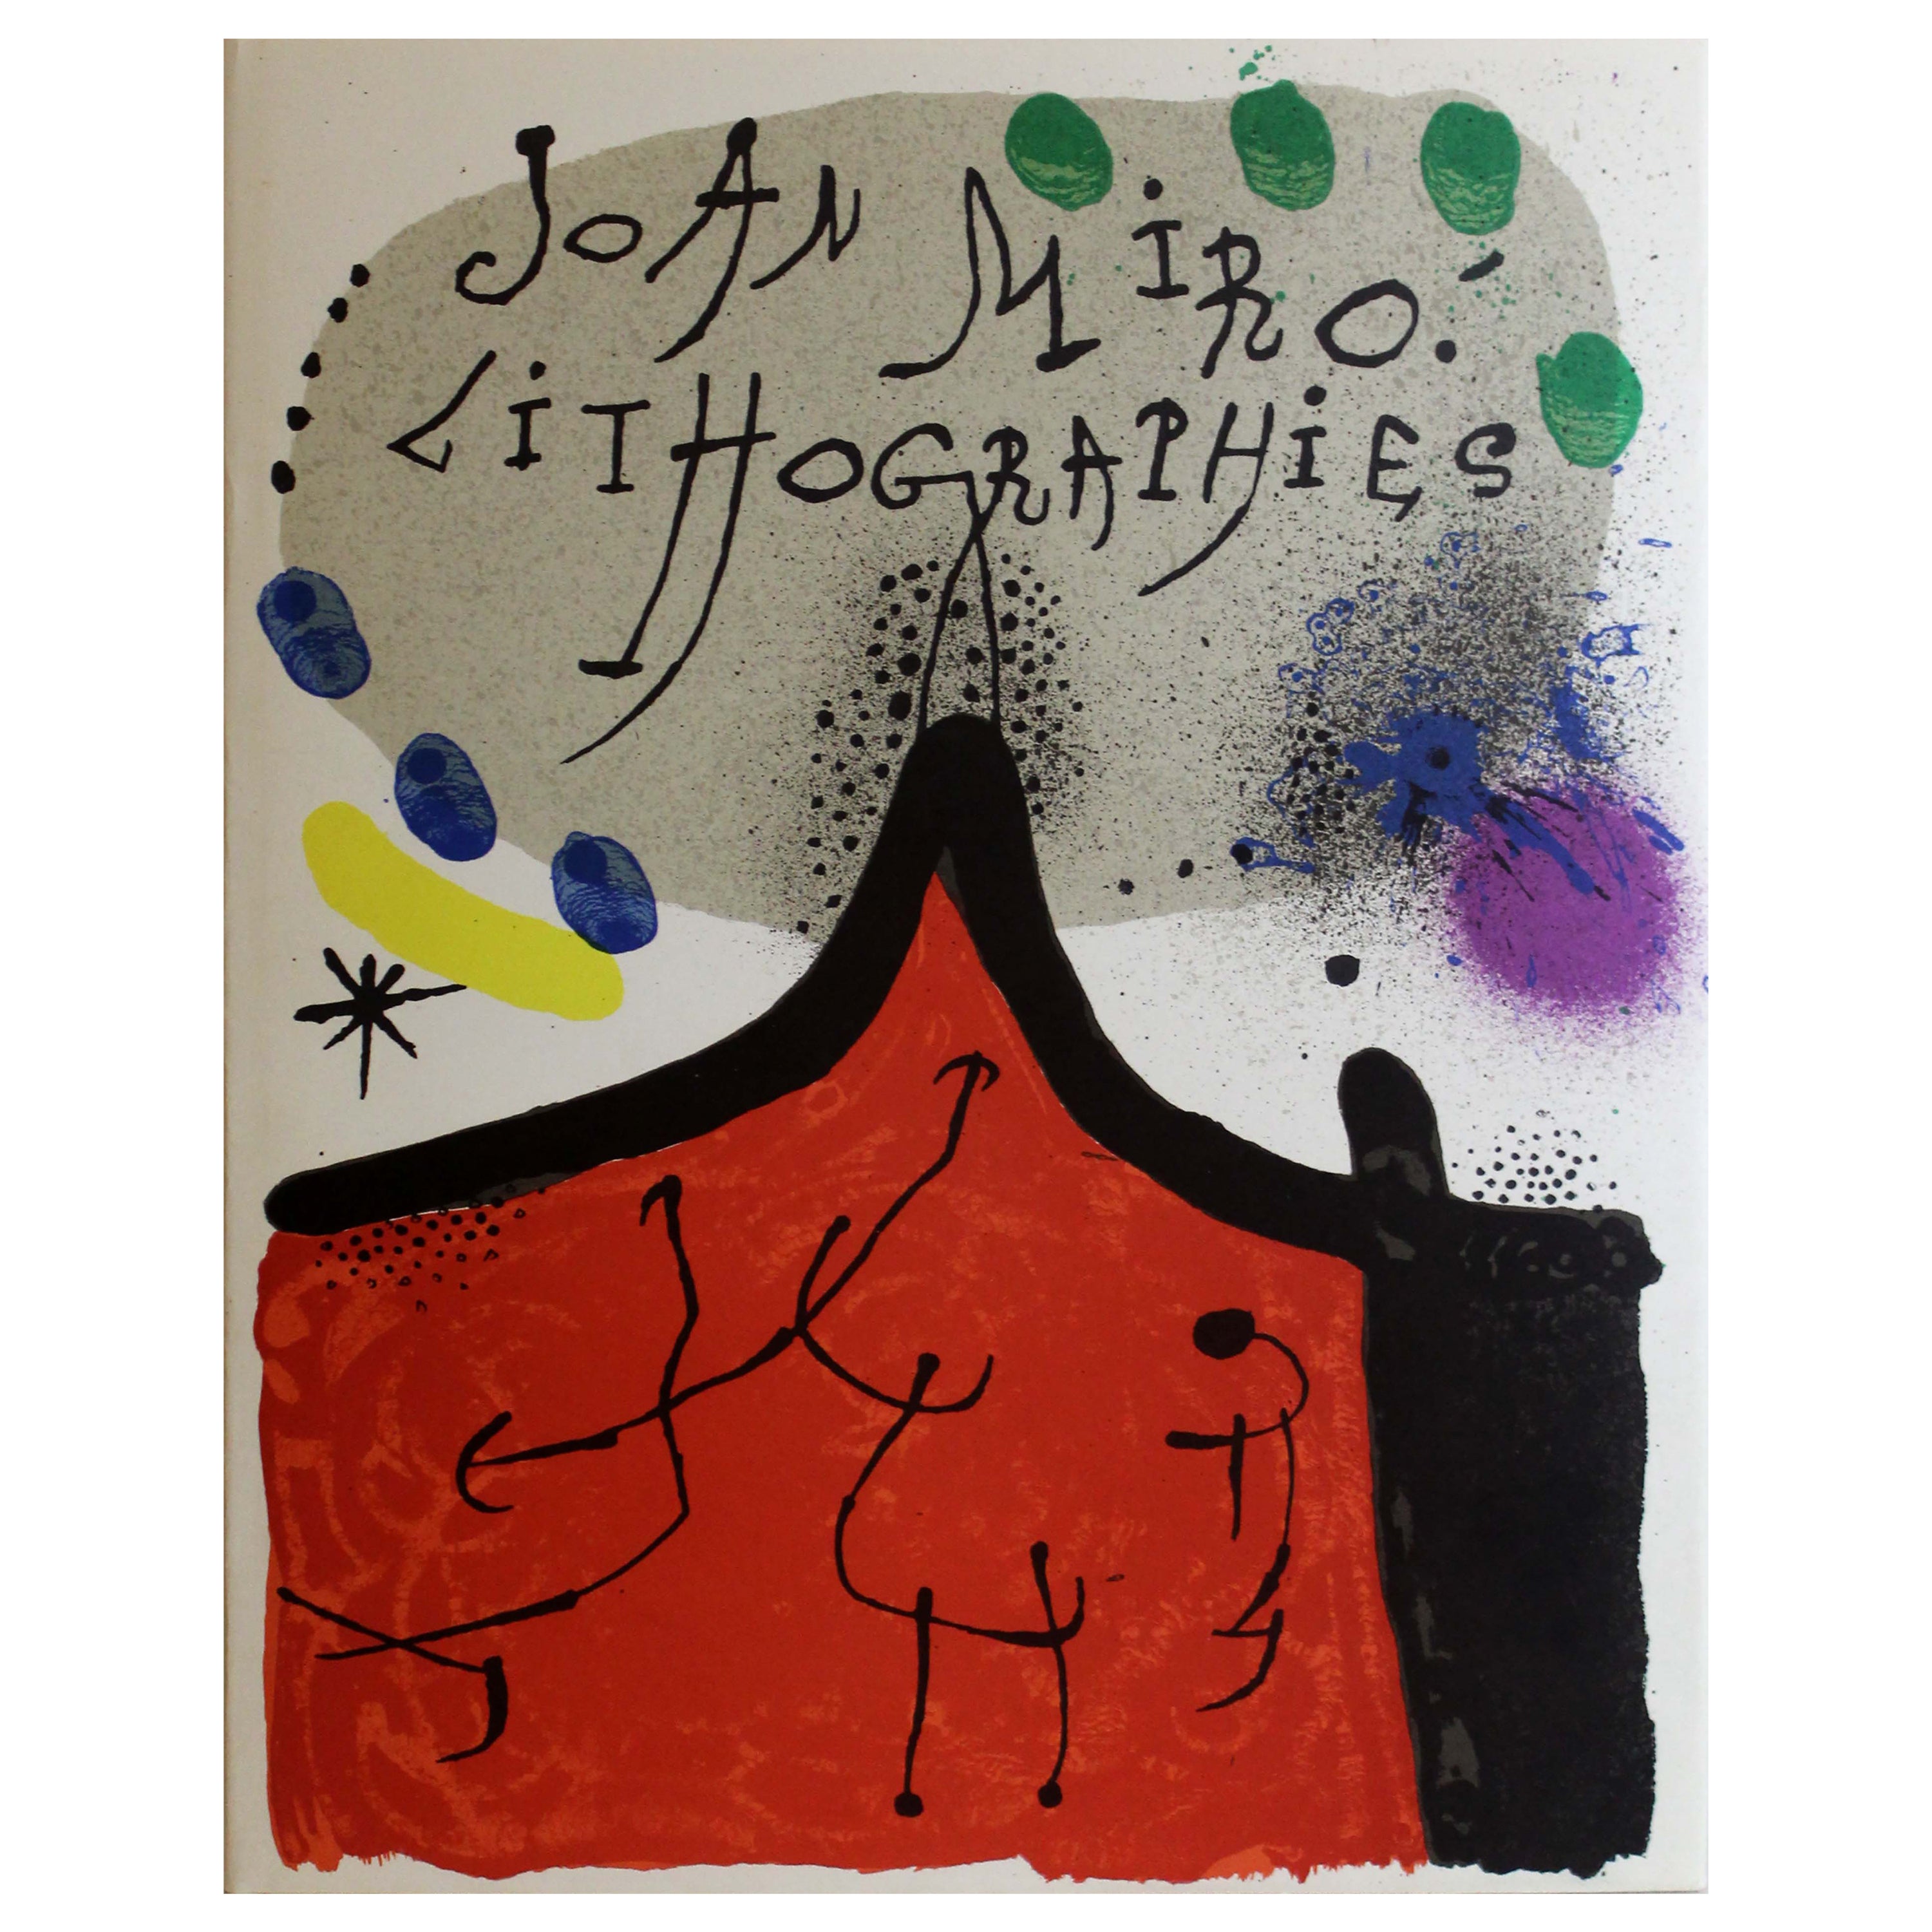 Joan Miro Lithographies Volume i Book with Original Modern Lithographs 1972